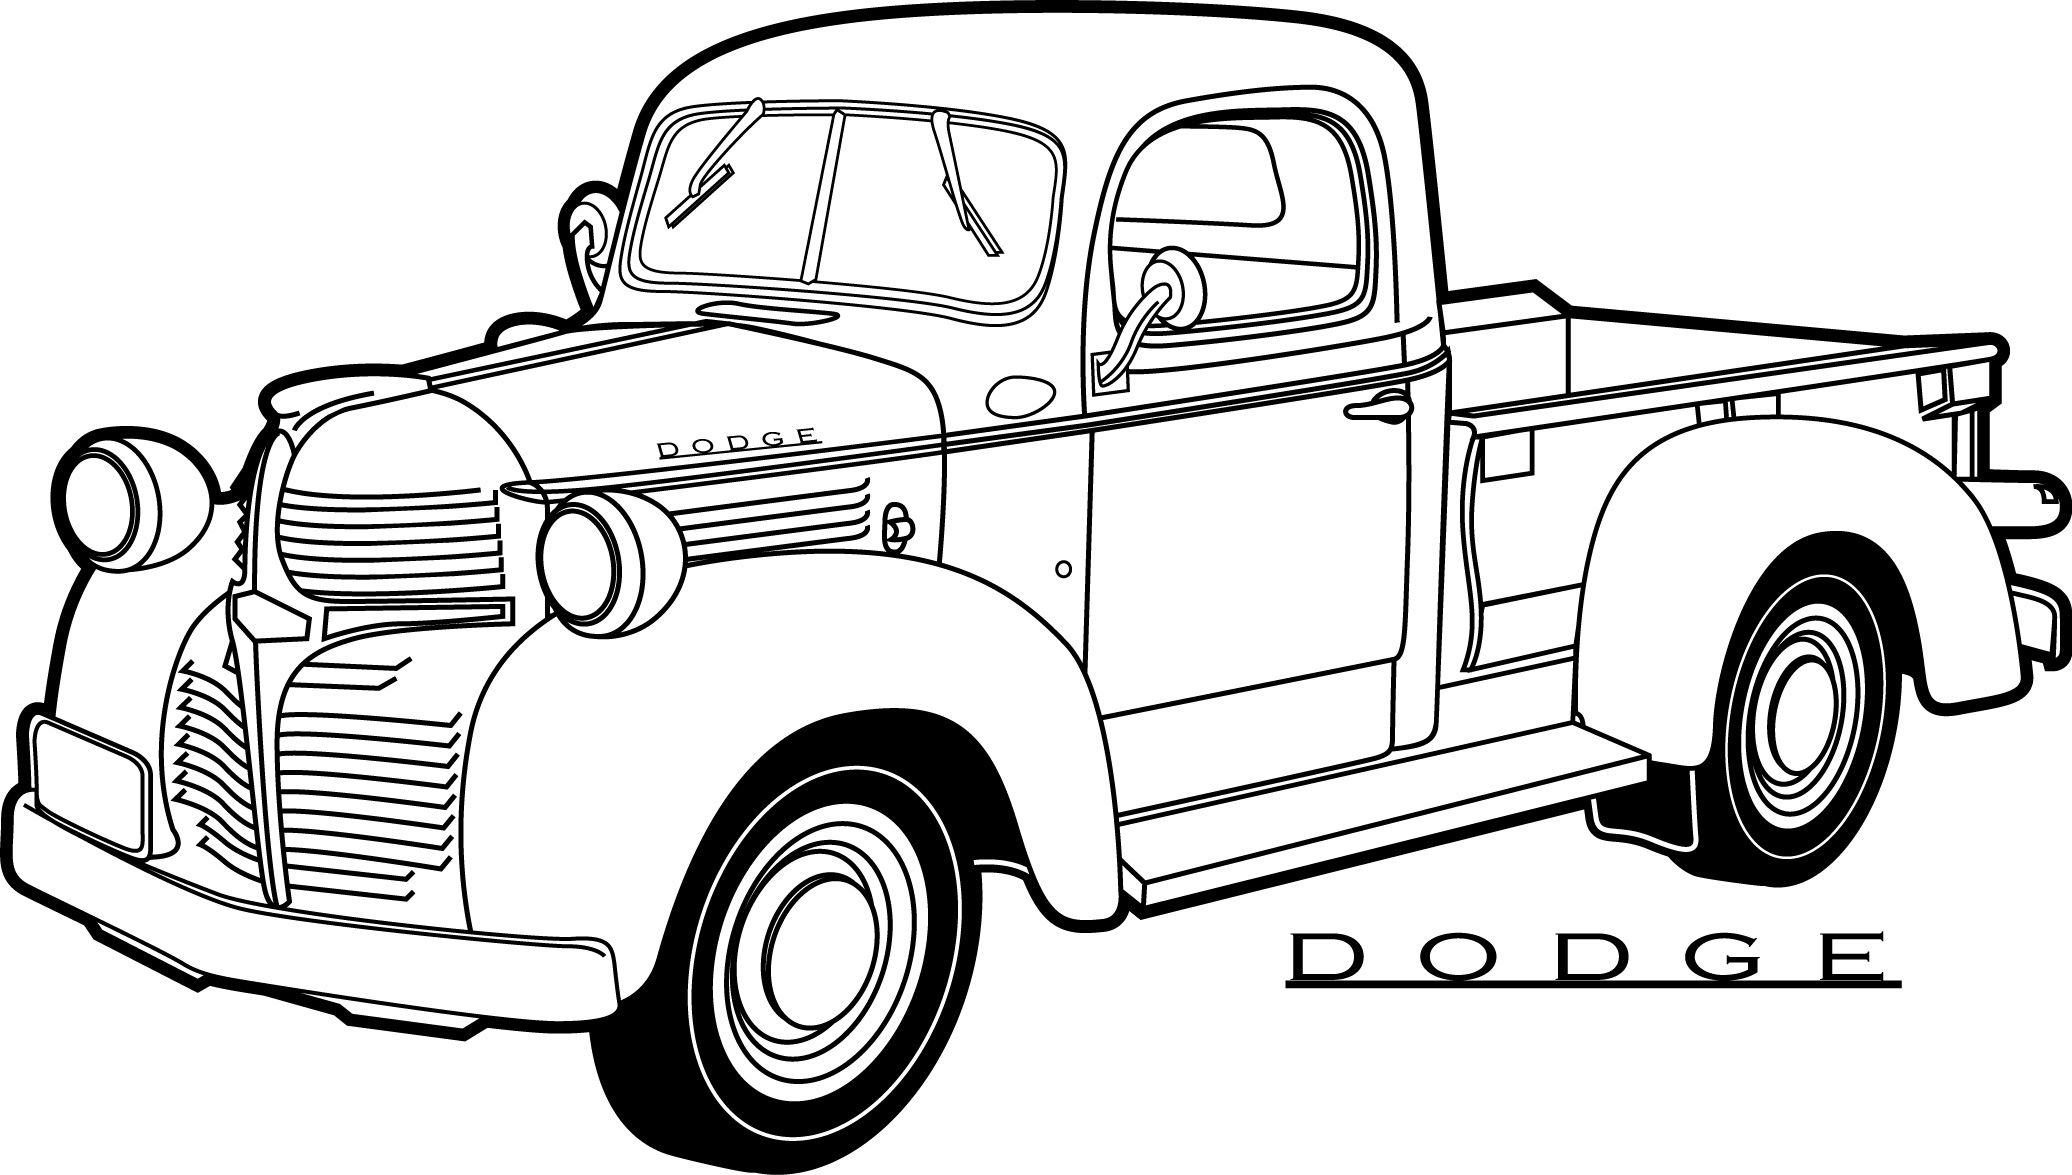 hot-rod-car-coloring-pages-at-getcolorings-free-printable